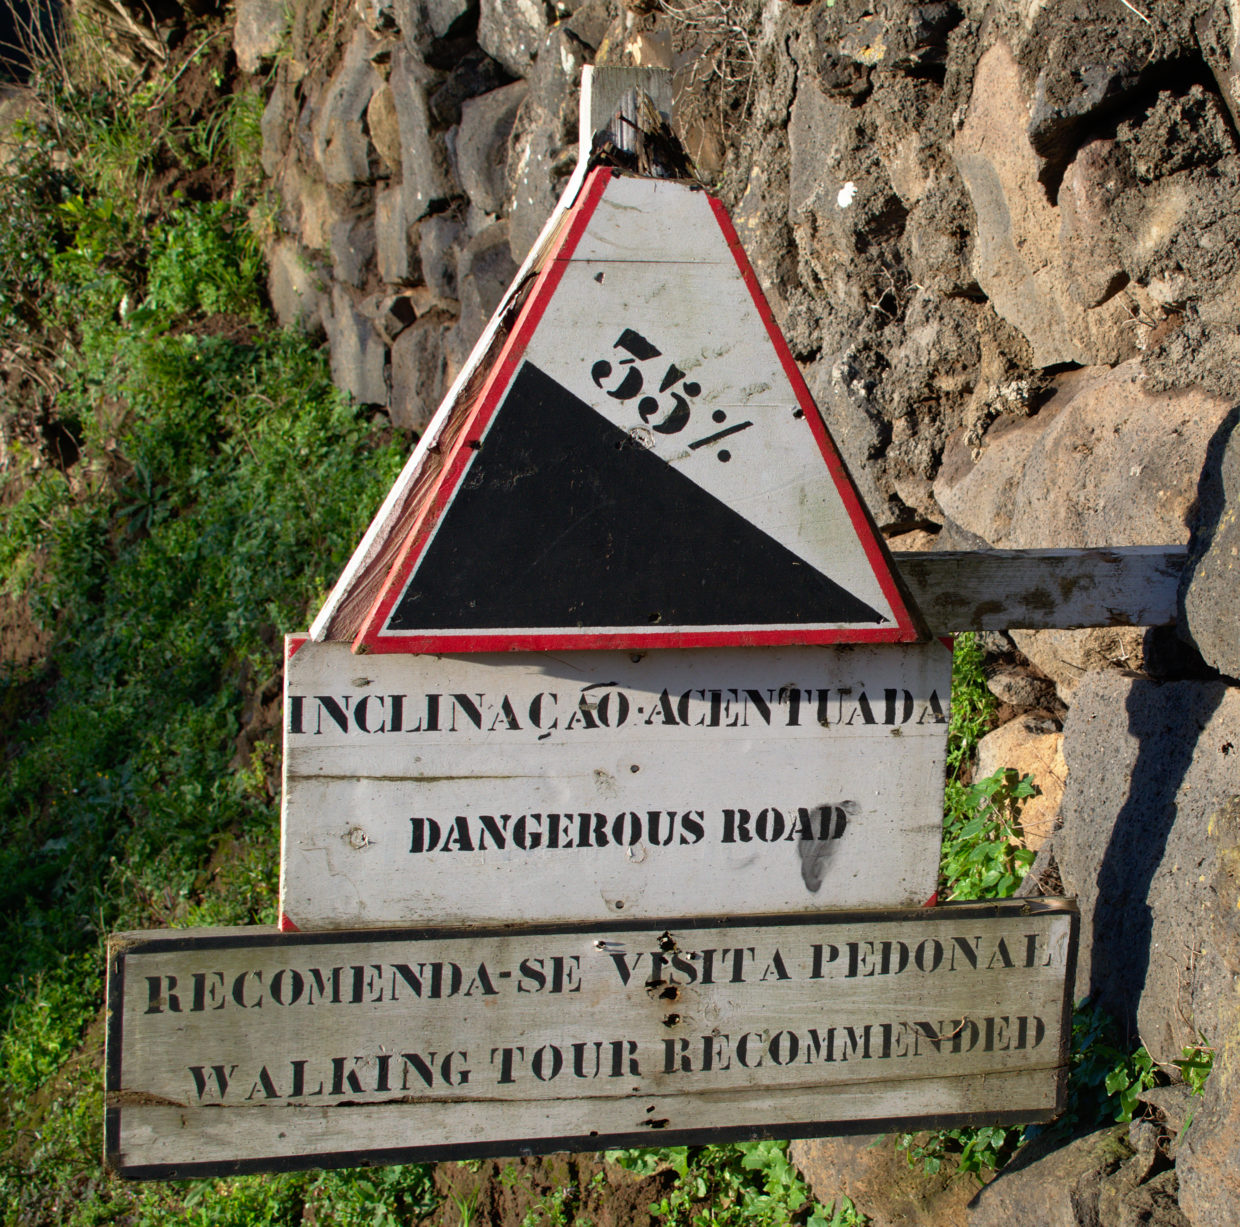 This sign on the way to the "Farol Ponta do Arnel" should definitely be taken seriously.